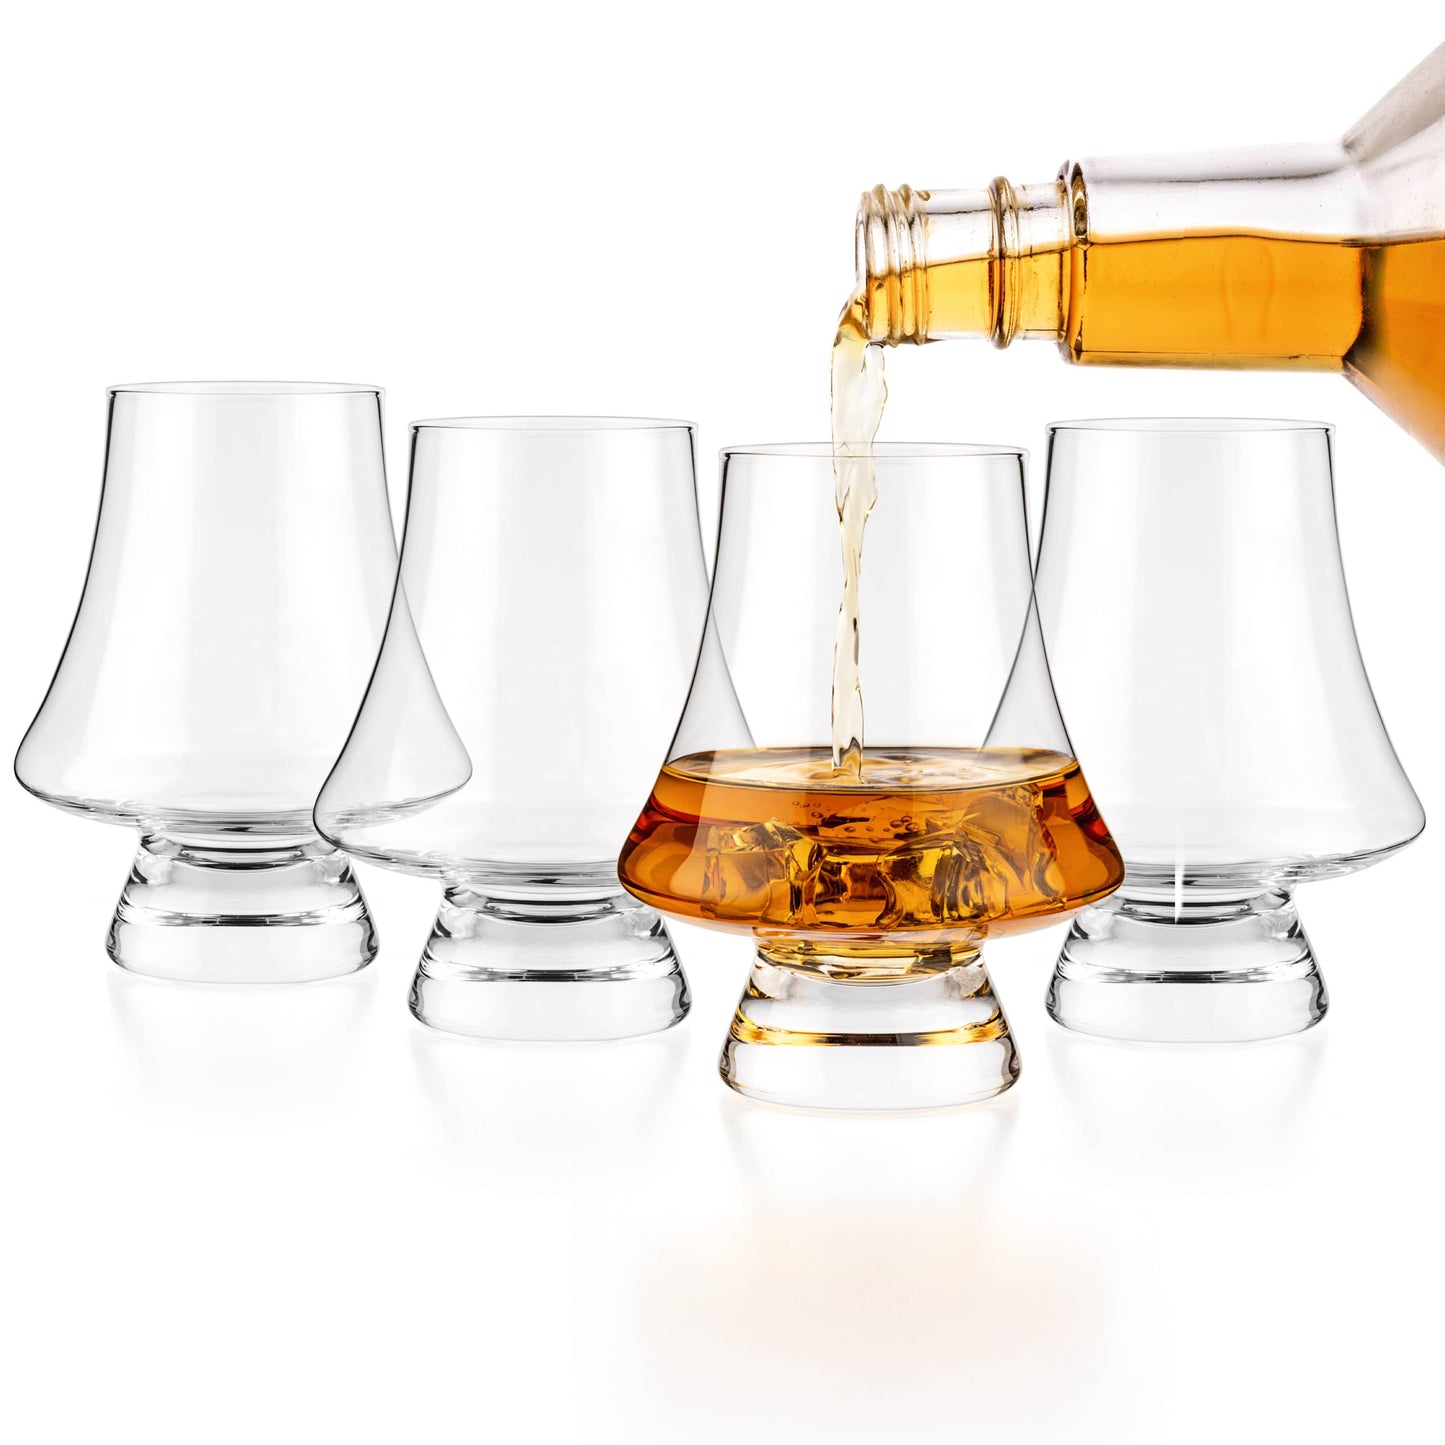 luxbe - bourbon & brandy crystal glasses shifters, set of 4